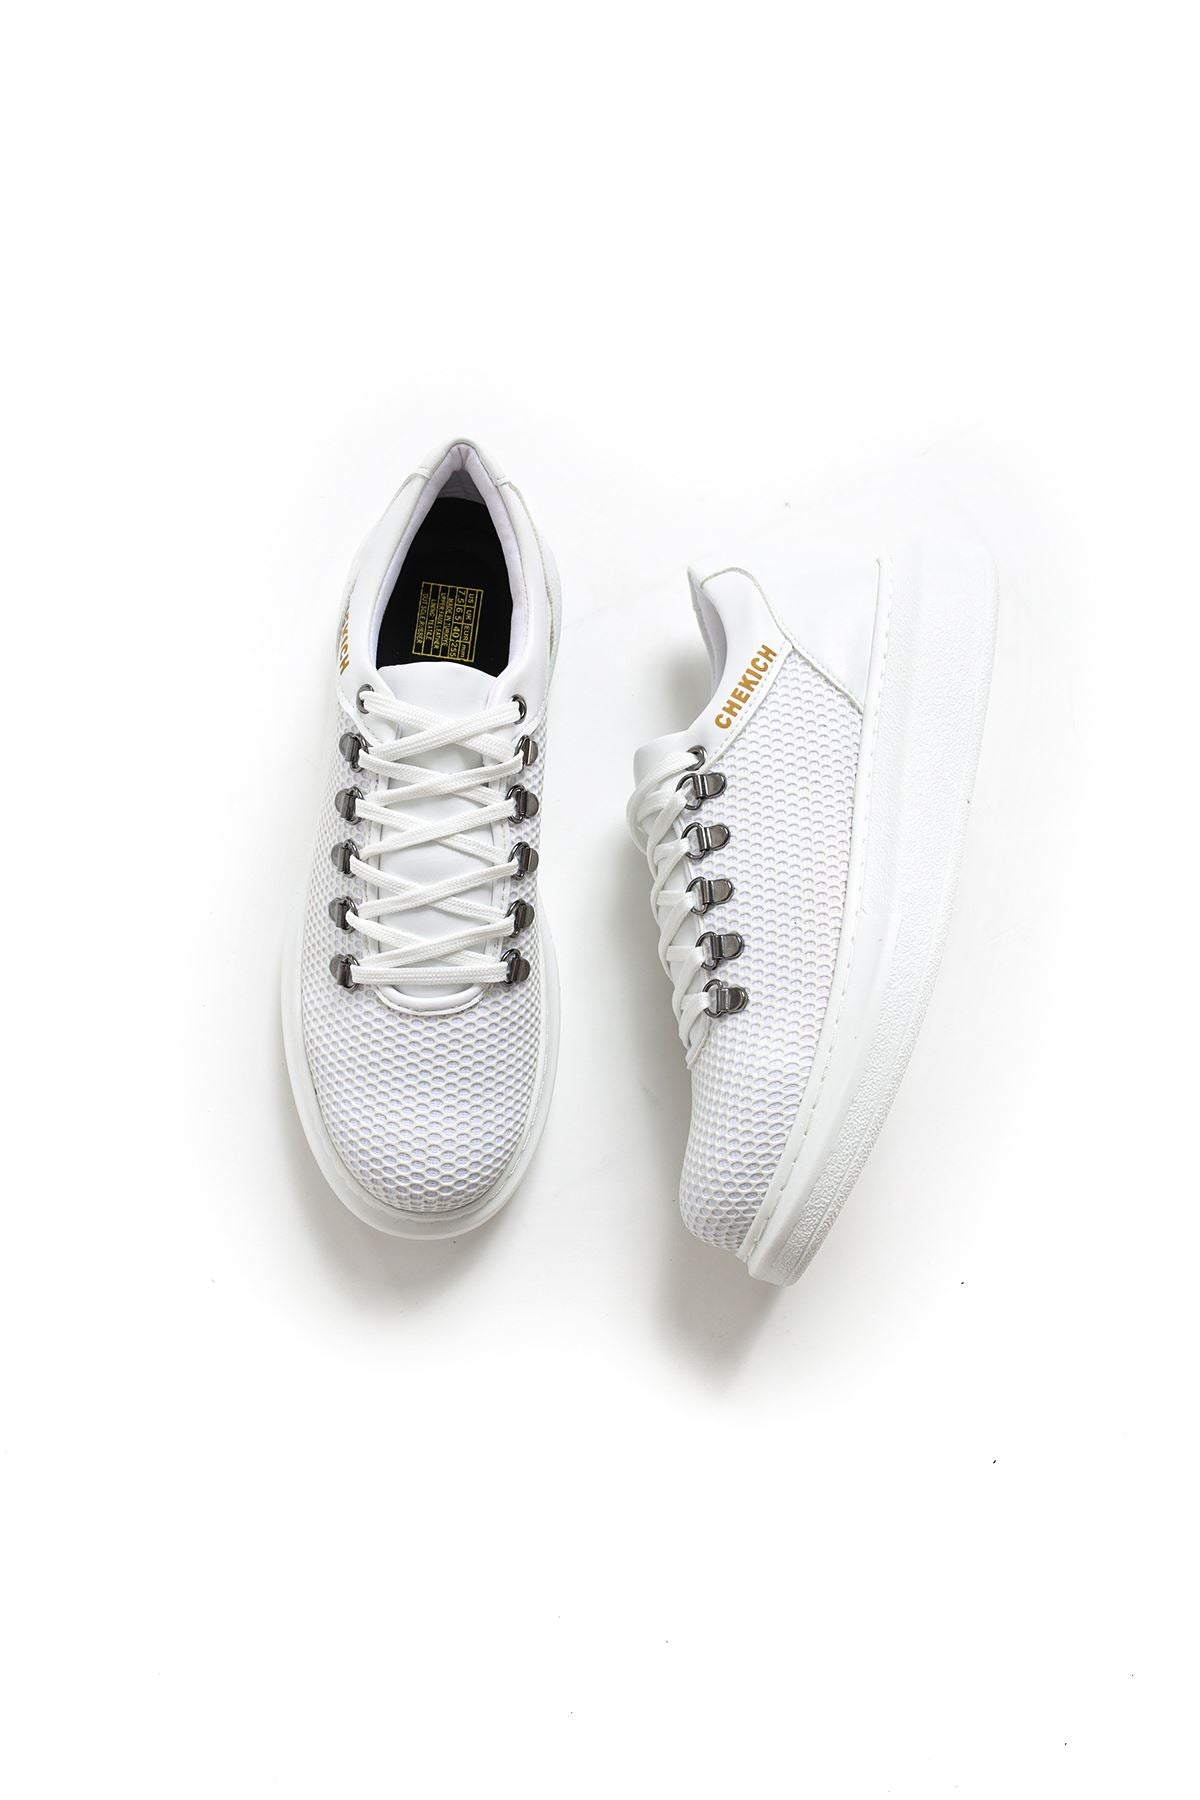 CH021 Men's Unisex Full White Honeycomb Processing Casual Sneaker Sports Shoes - STREETMODE™